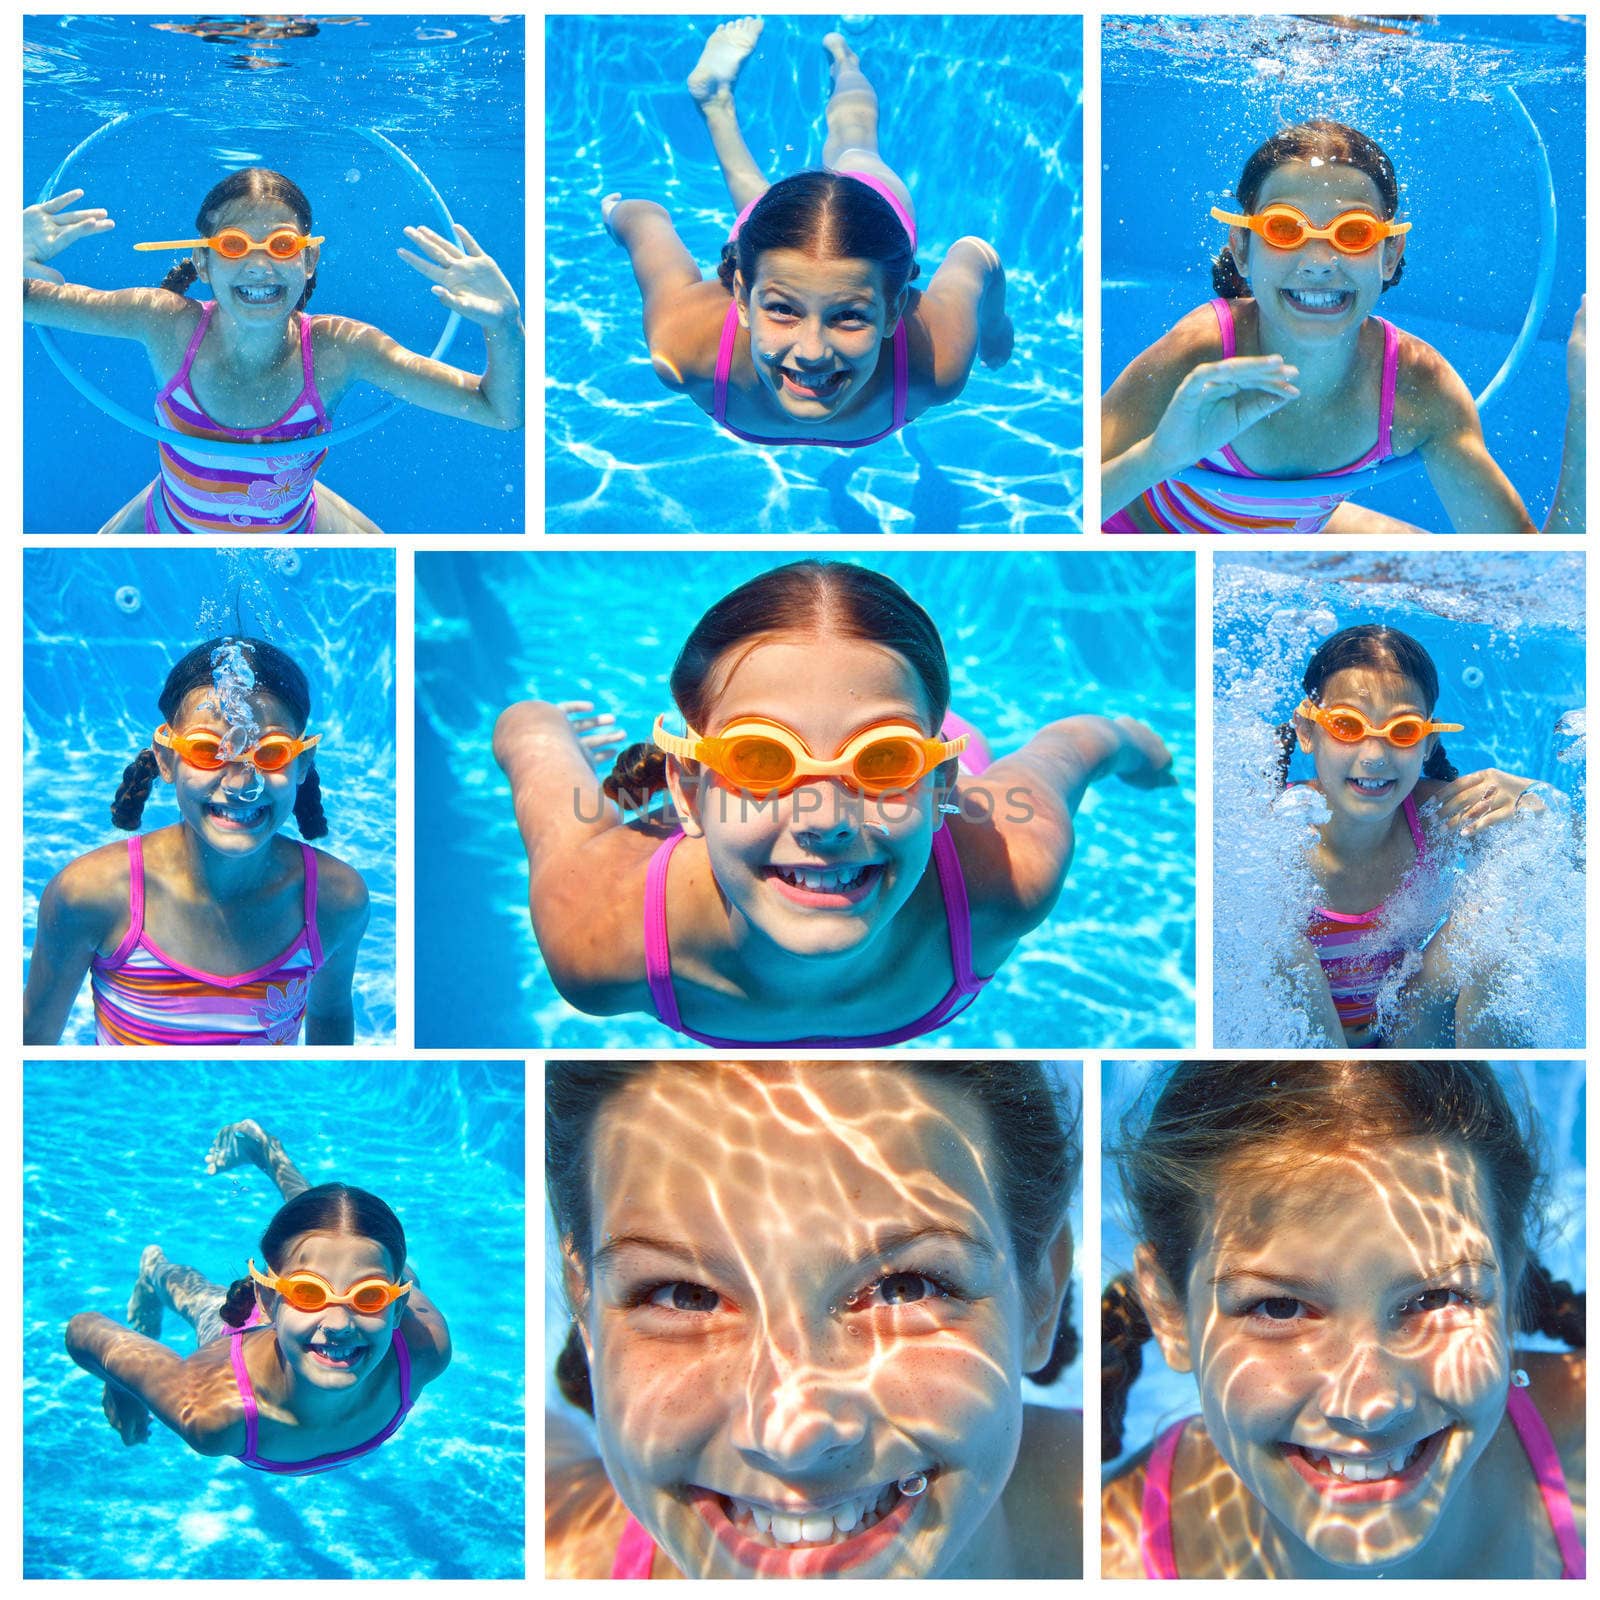 Collage of images the cute girl swimming underwater and smiling